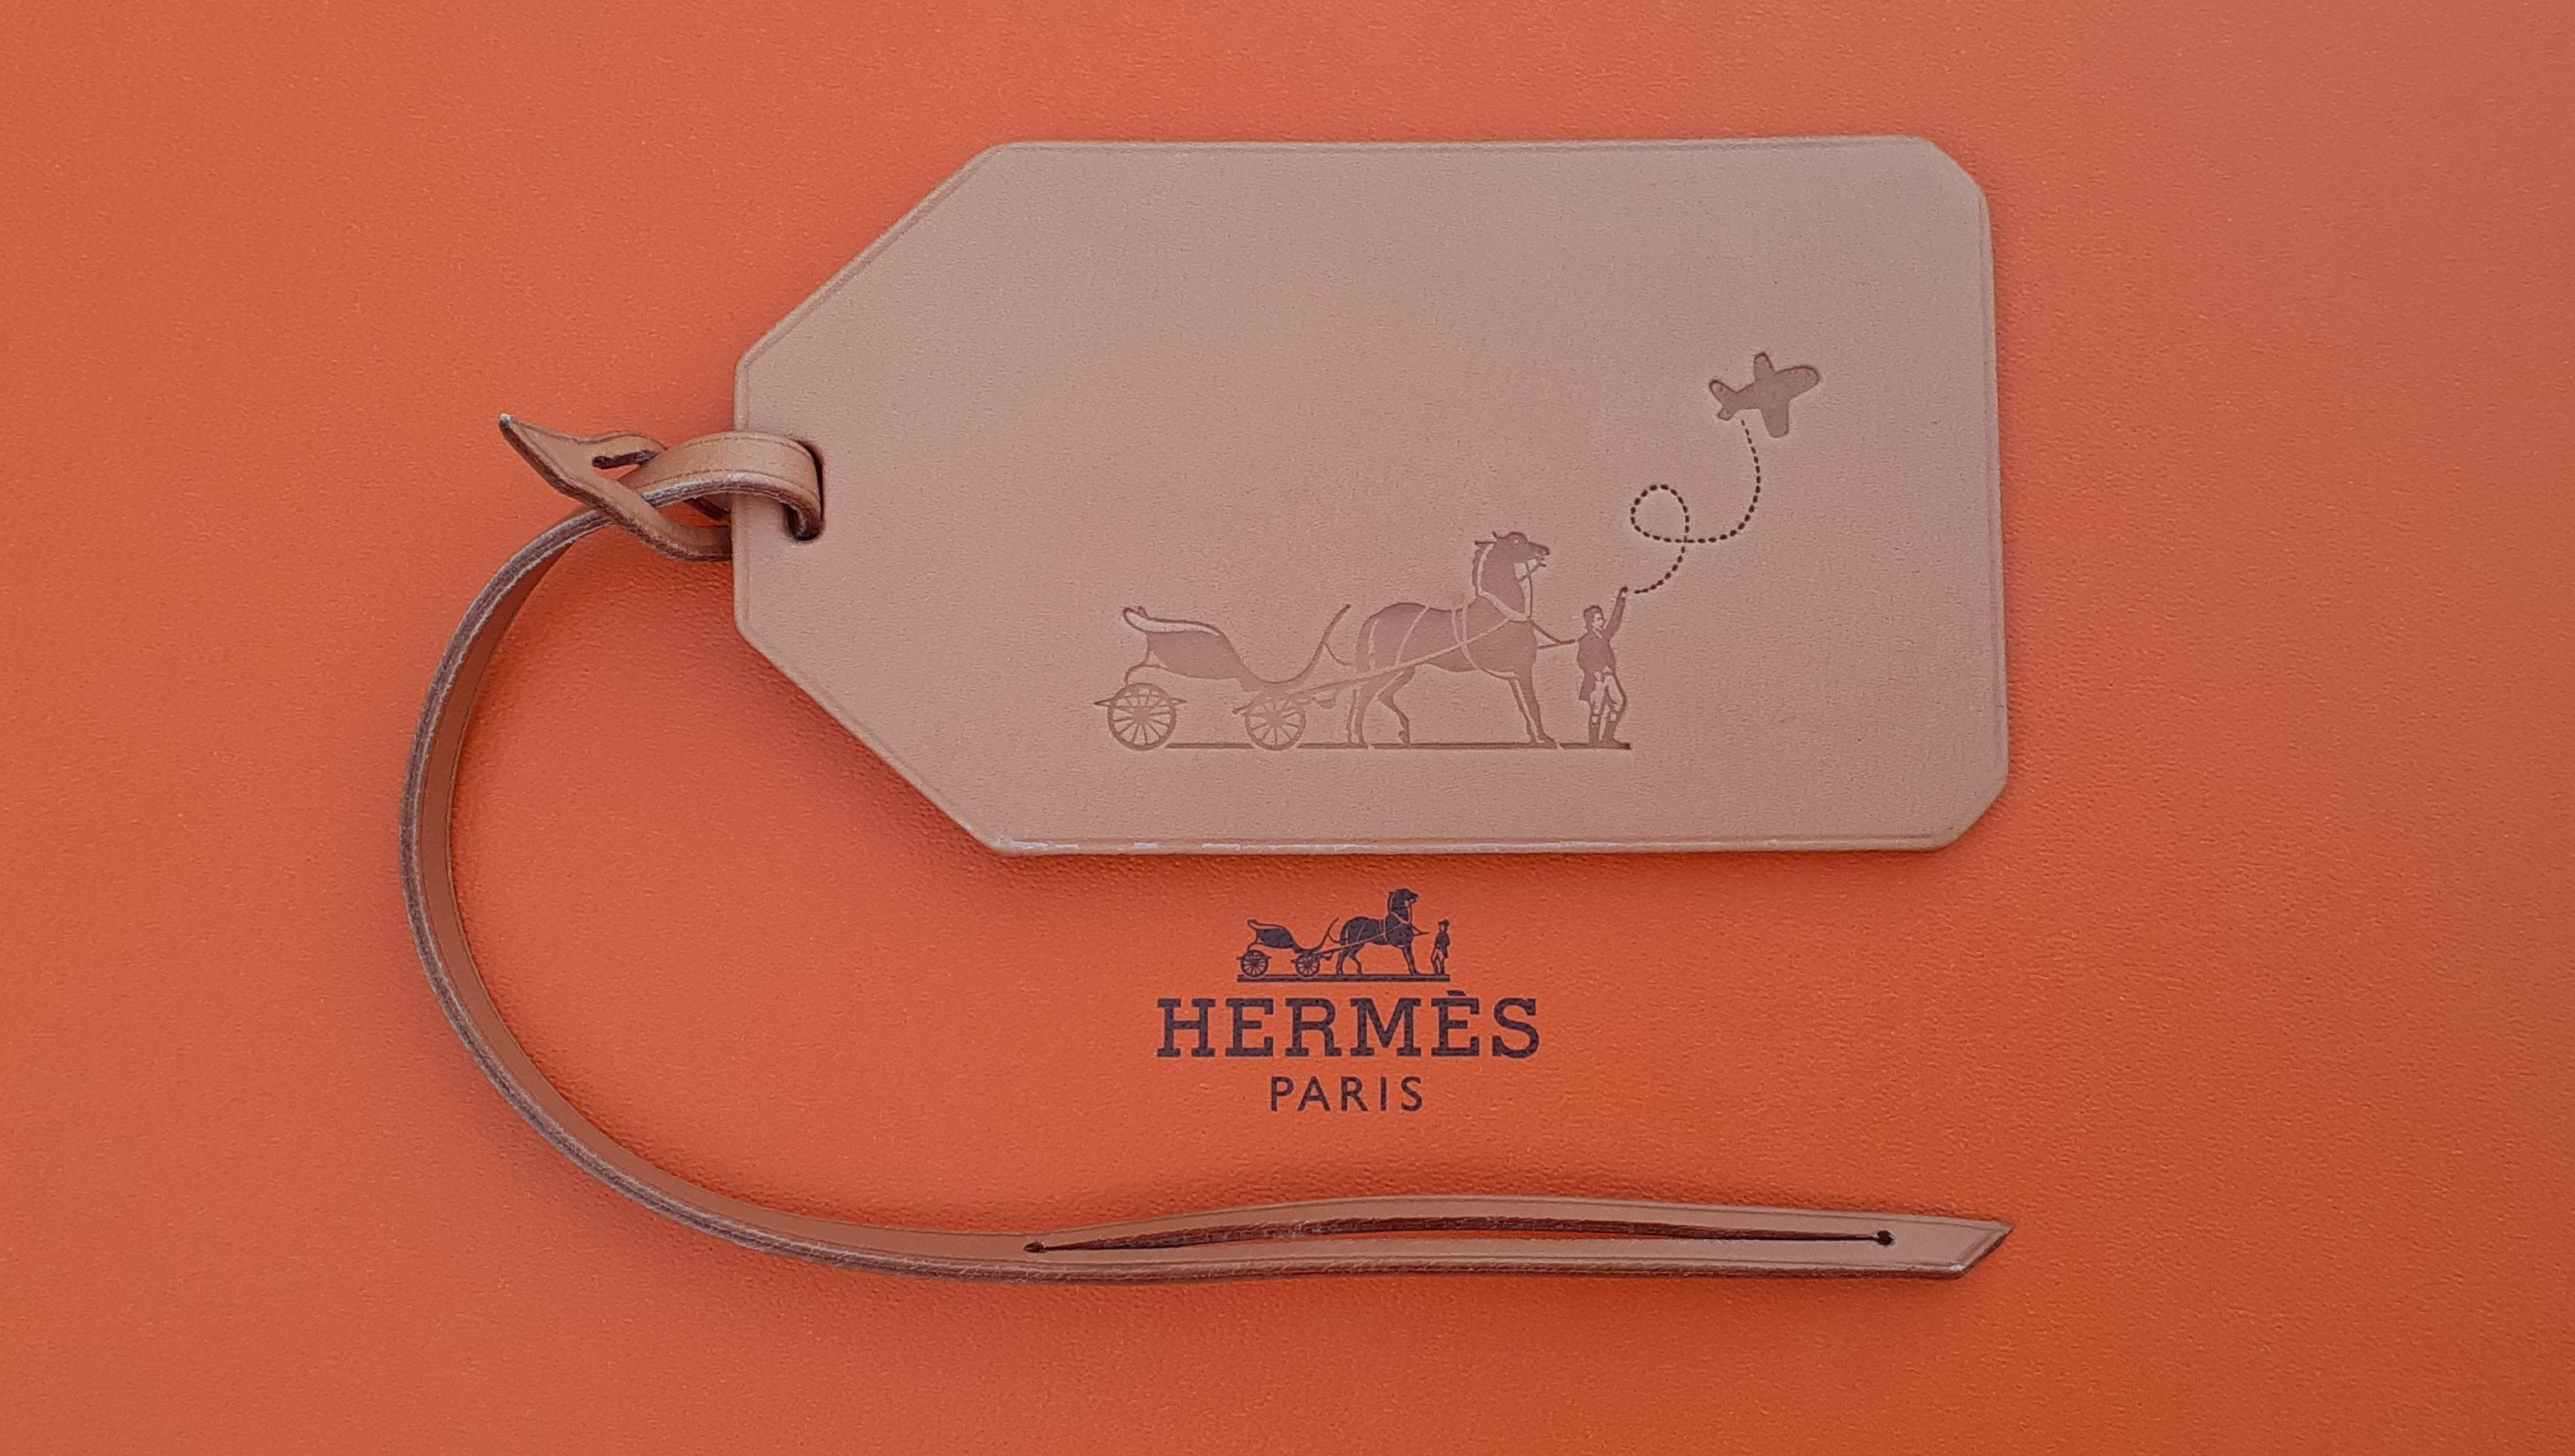 Cute Authentic Hermès Adress Tag

You can write your address or phone number directly on the lines provided for this purpose

Made in France

Made of Smooth Vache Hunter Leather

Colorway: Naturel Sable

Carriage and plane engraved in front

